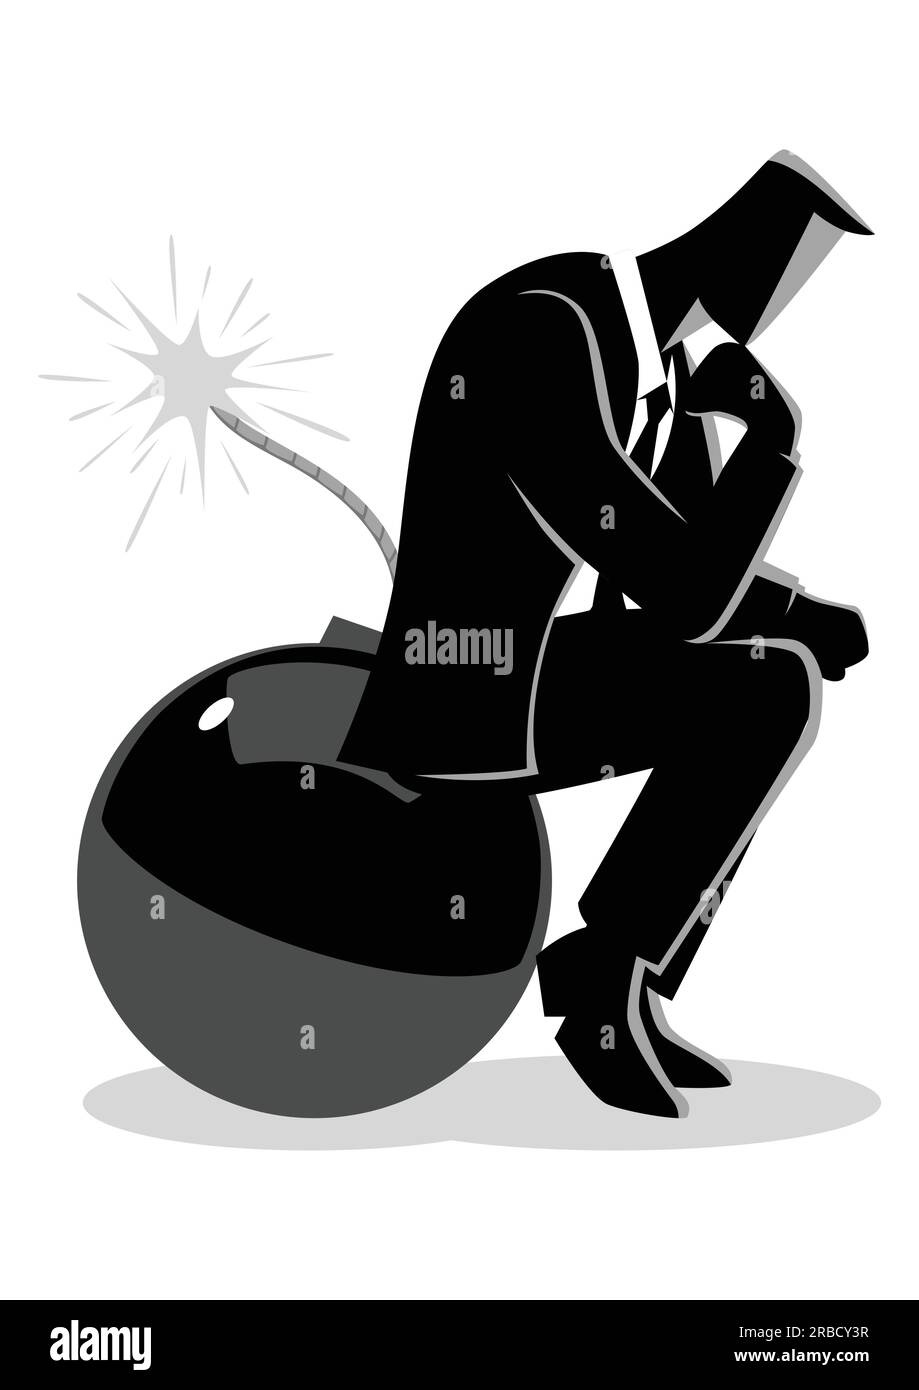 Business concept illustration of a businessman sitting on a bomb while thinking, running out of time, too much thinking will kill you. Stock Vector